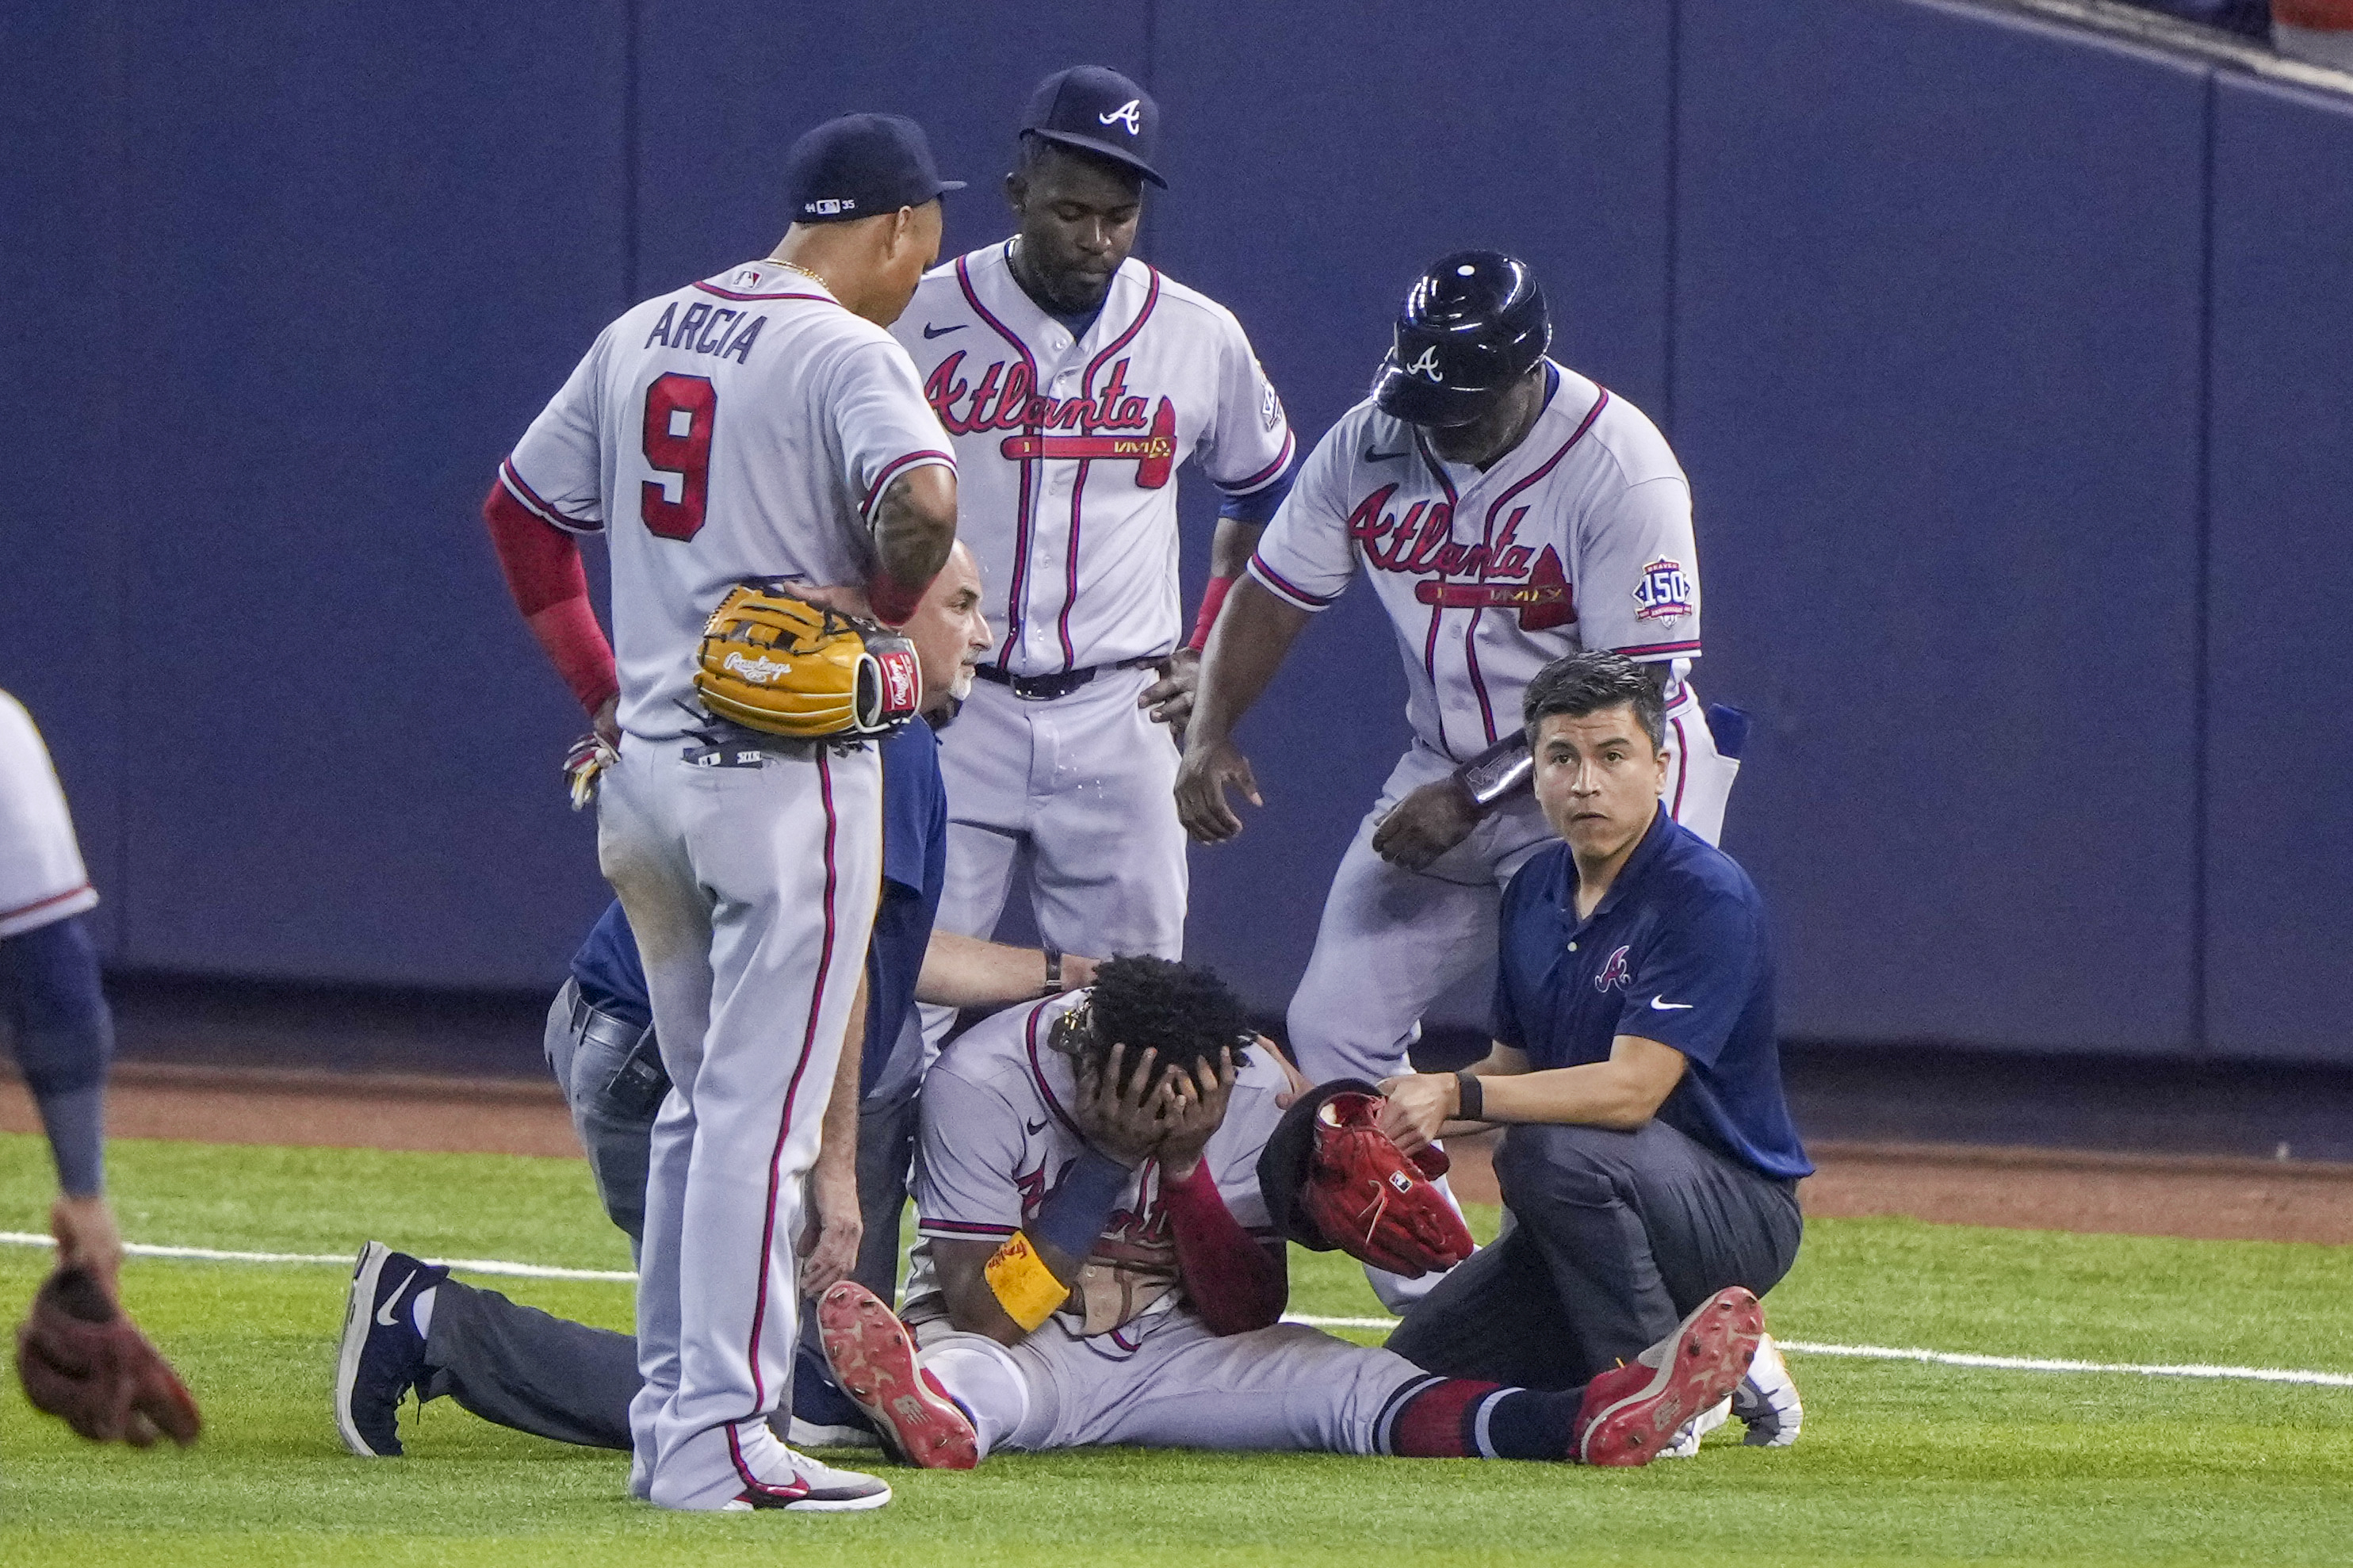 Braves' Ronald Acuna Jr. Offers Three-Word Message Amid Reports of